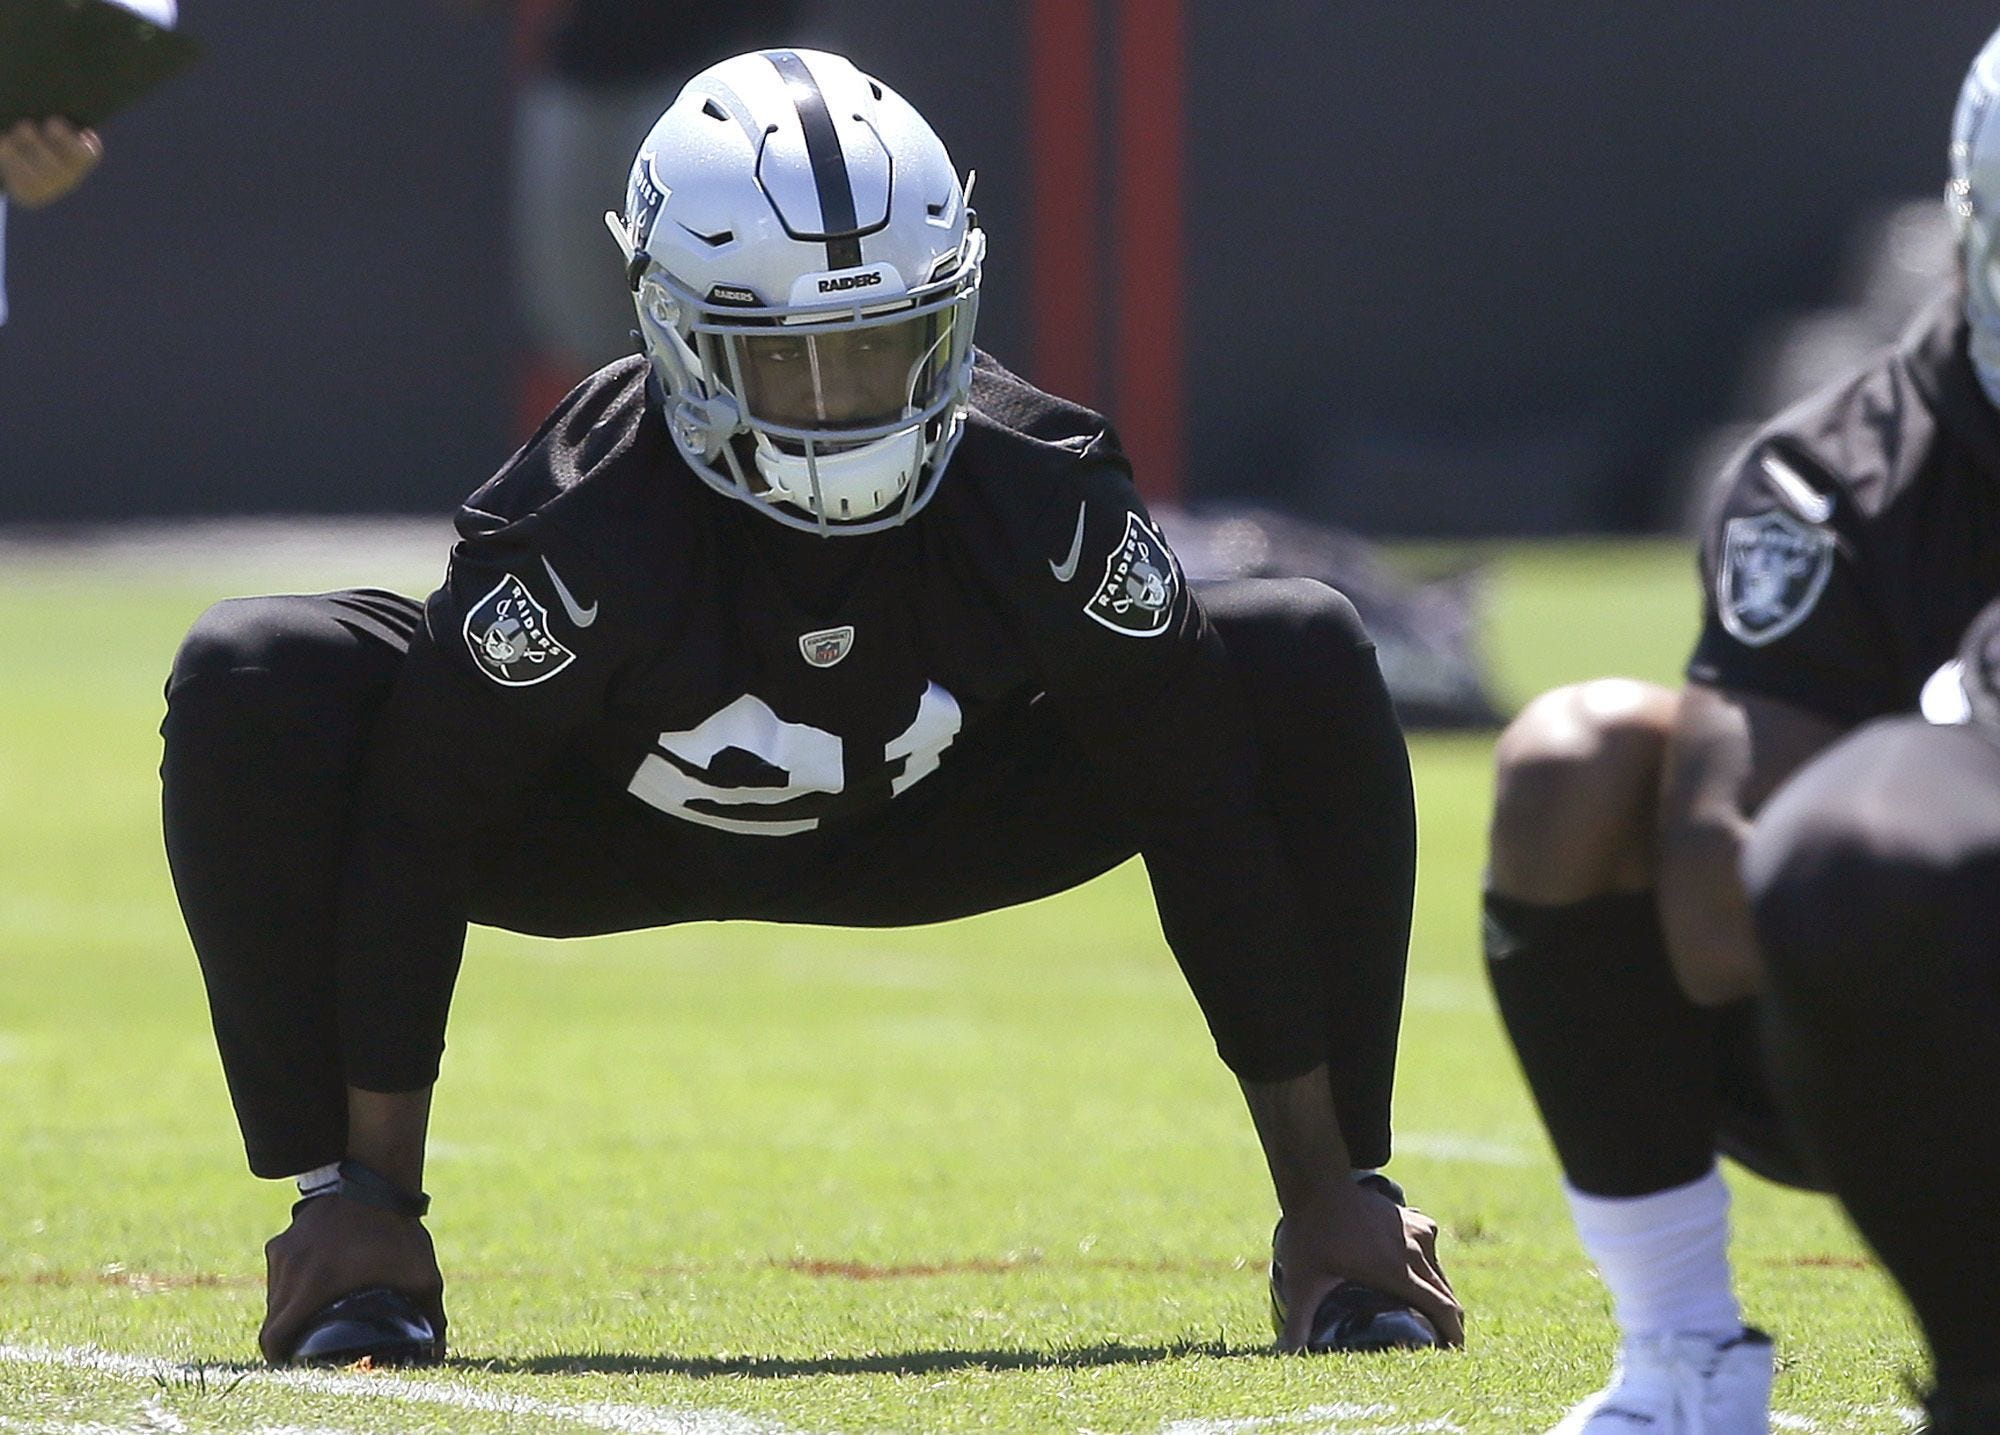 Raiders' Gareon Conley sues woman who accused him of sexual assault